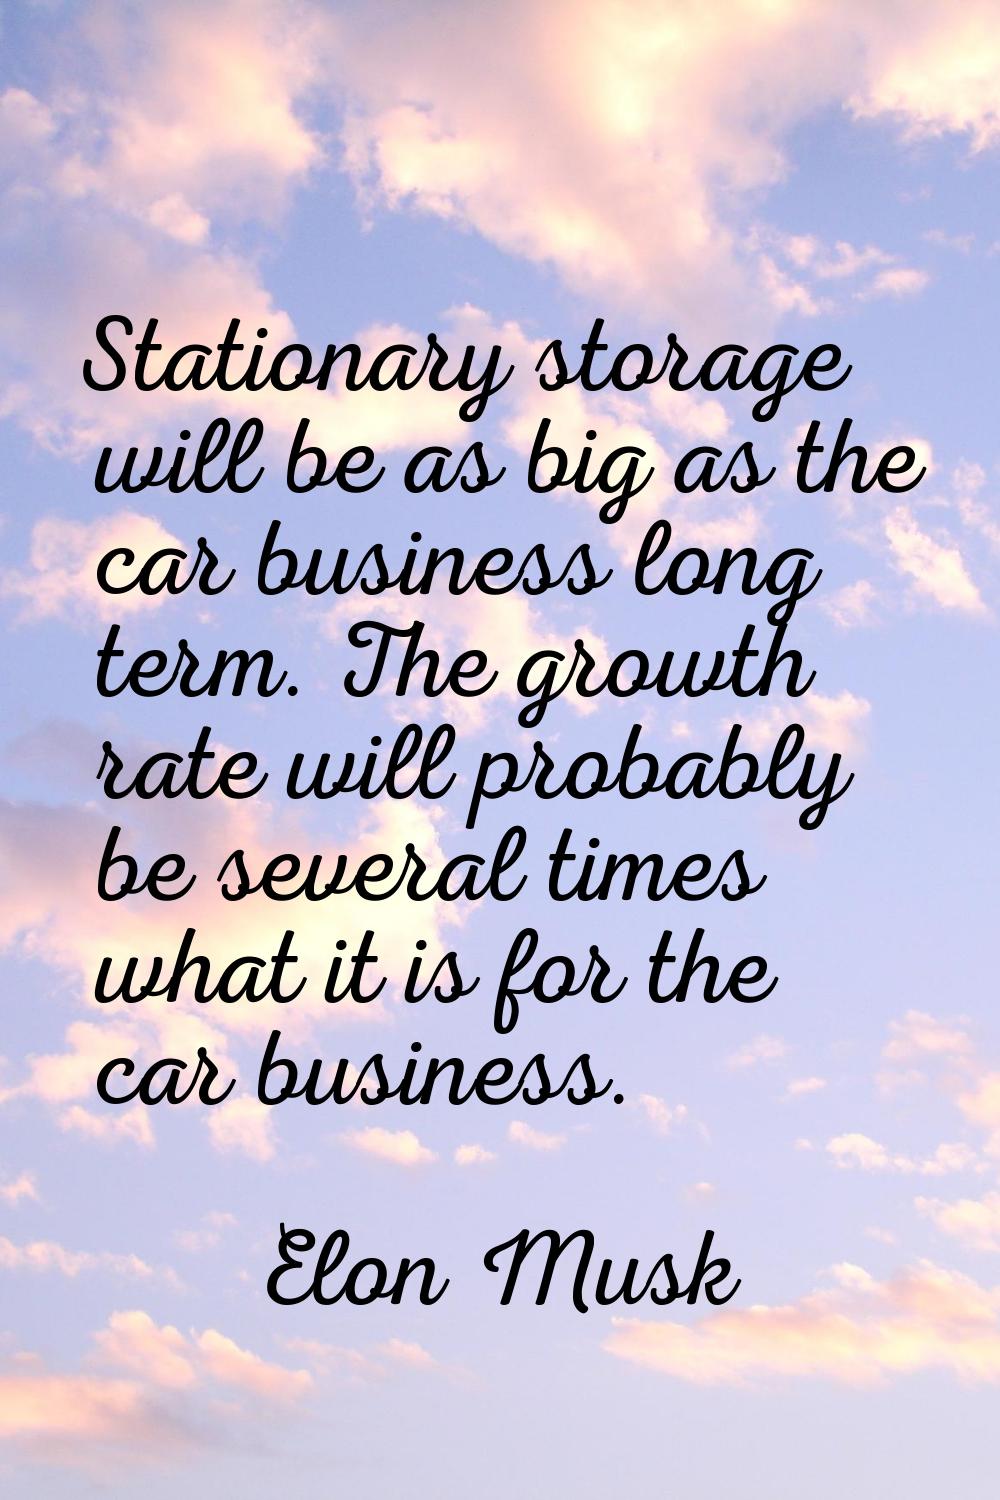 Stationary storage will be as big as the car business long term. The growth rate will probably be s